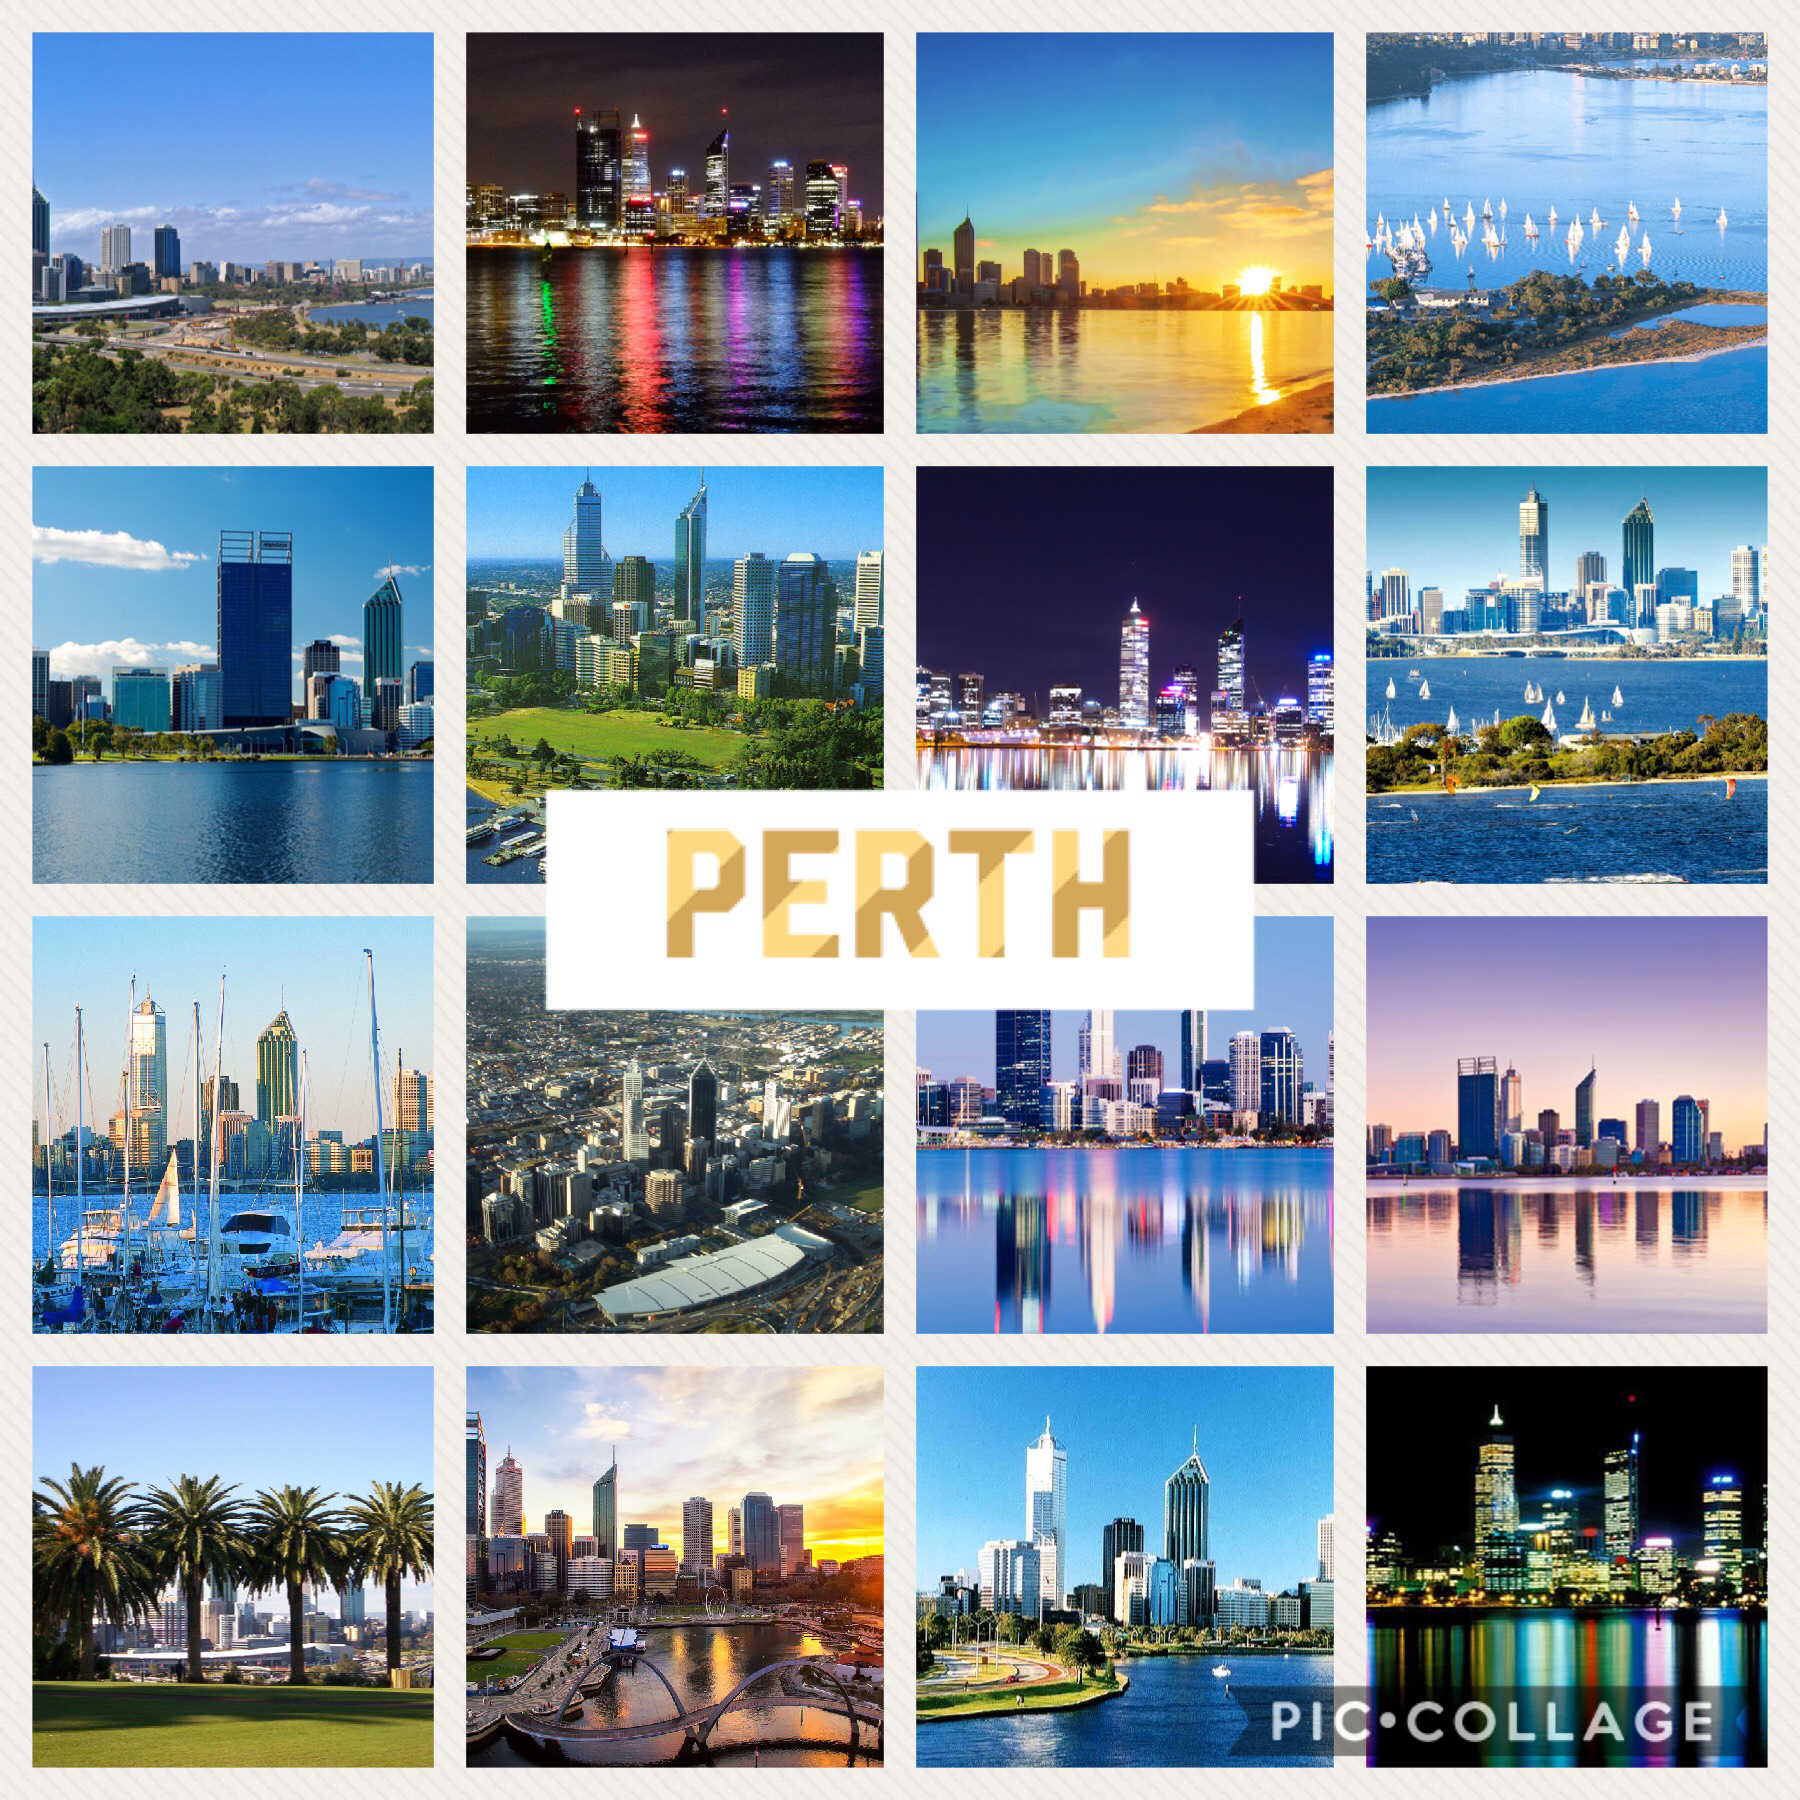 PERTH IS OUR